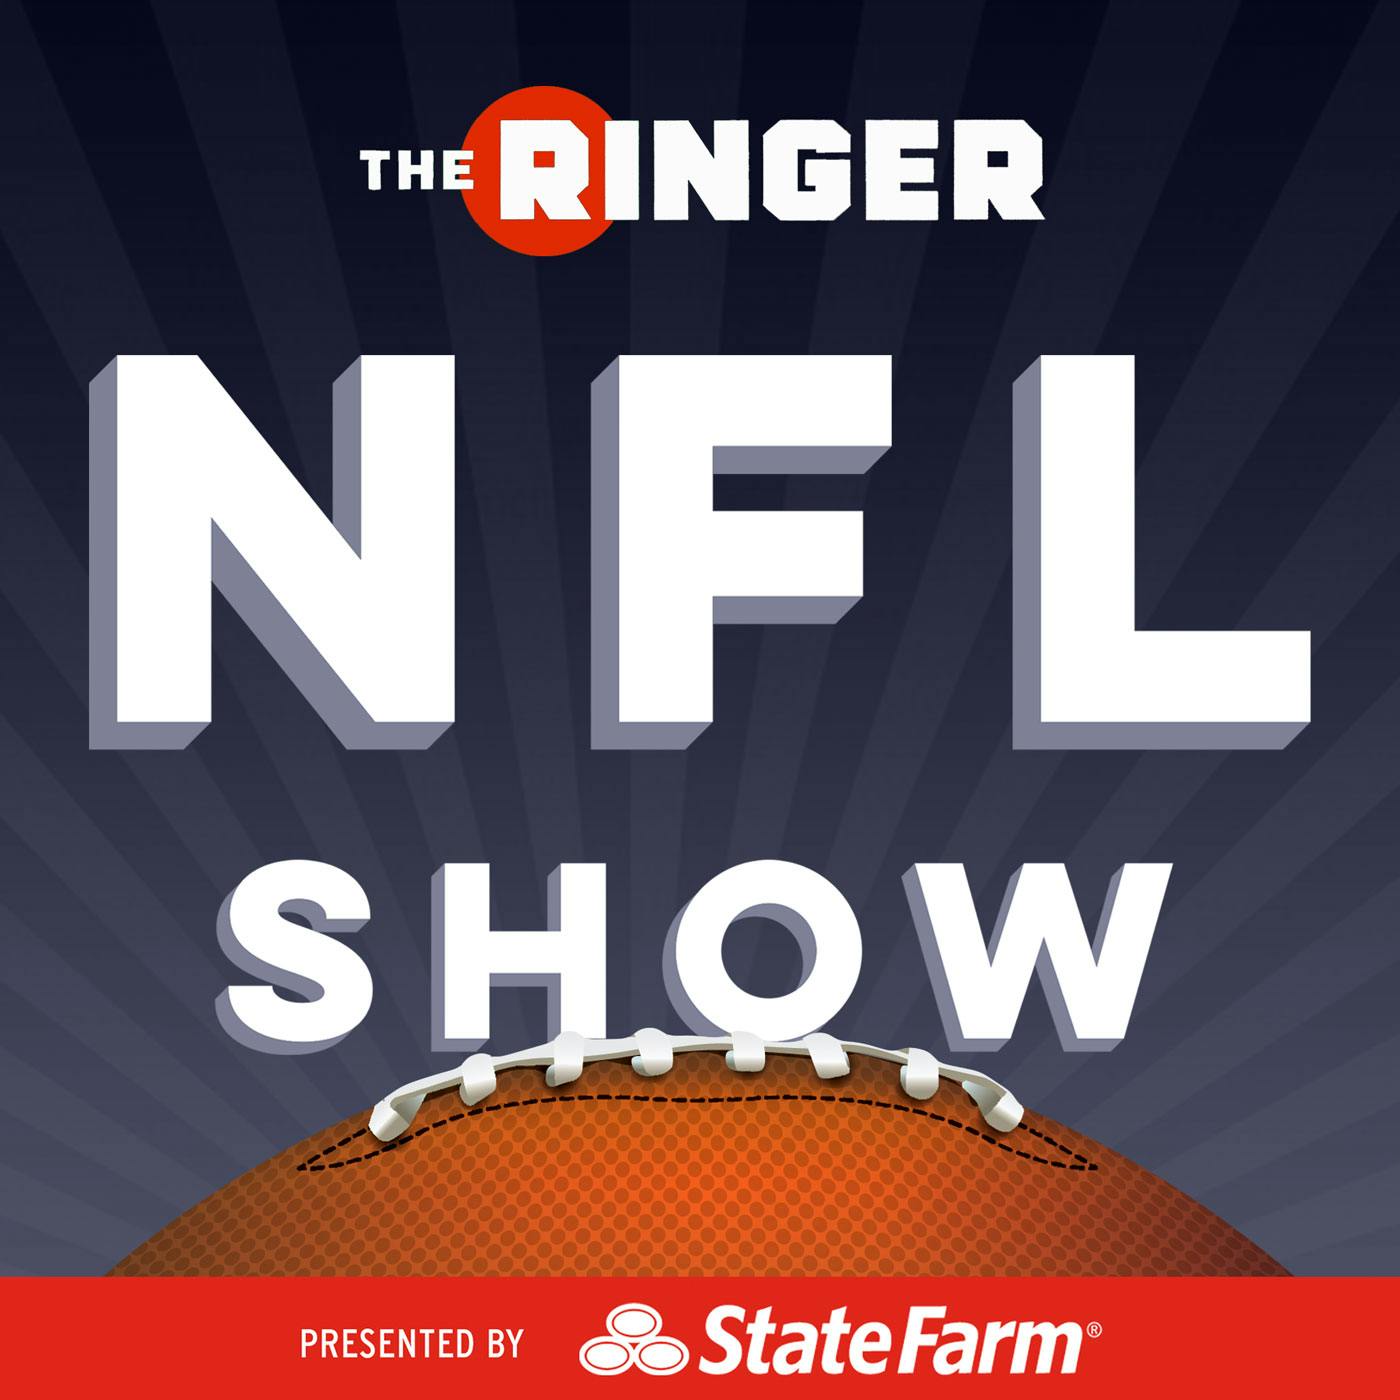 Advice for Saquon, Outlook for the Steelers, and Week 2 Likes | The Ringer NFL Show